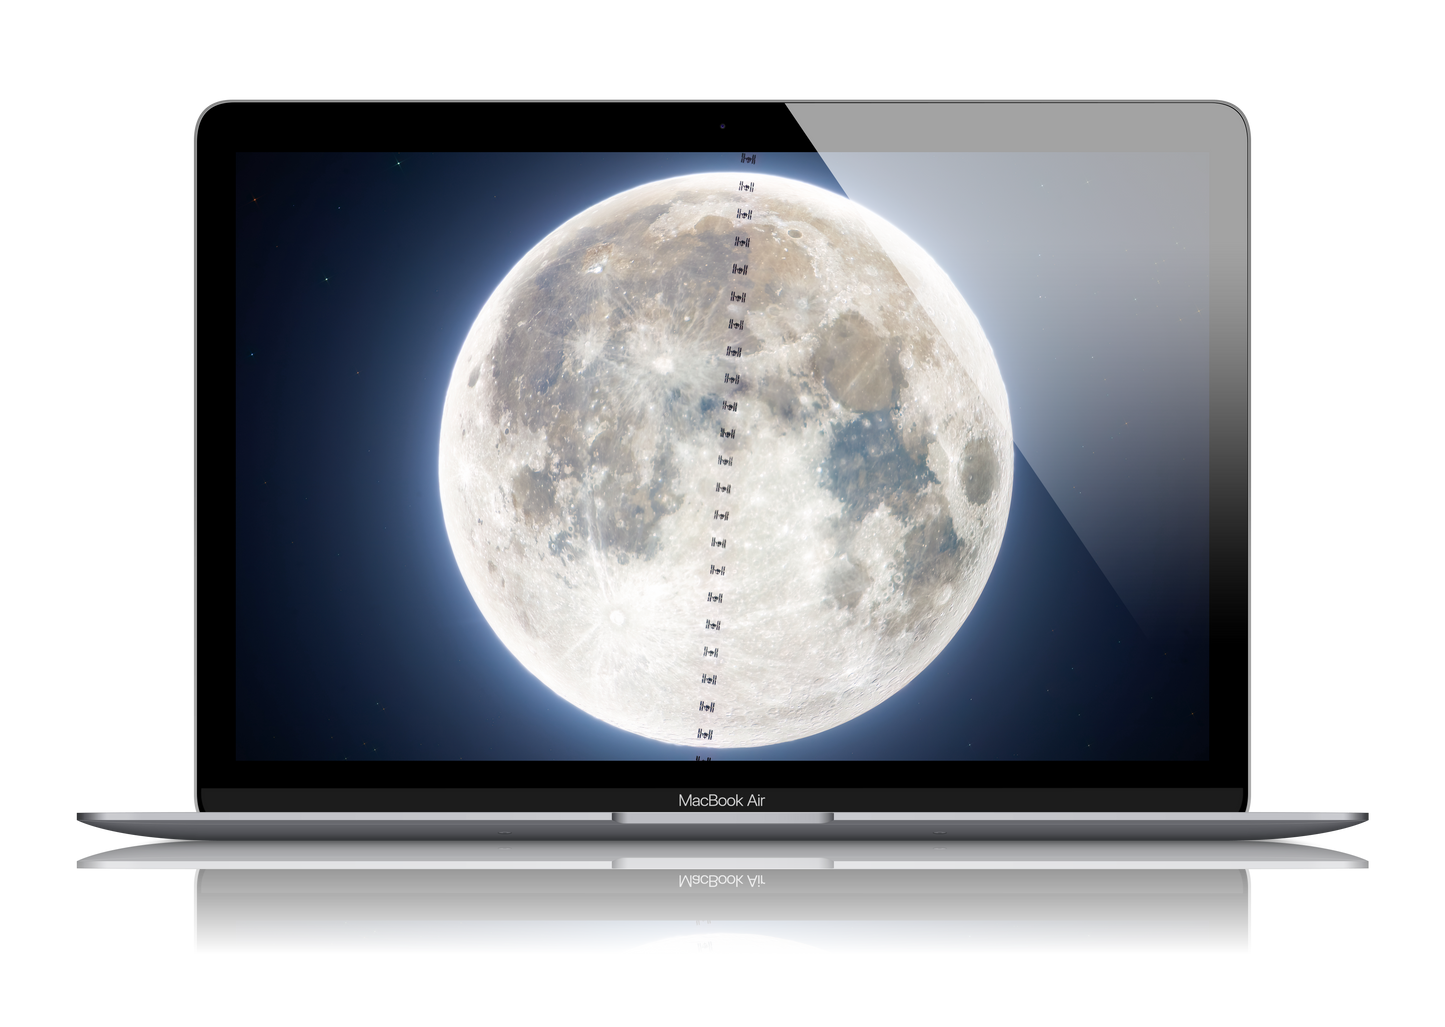 ISS Meets Snow Moon February 25th 2024 Wallpaper Bundle